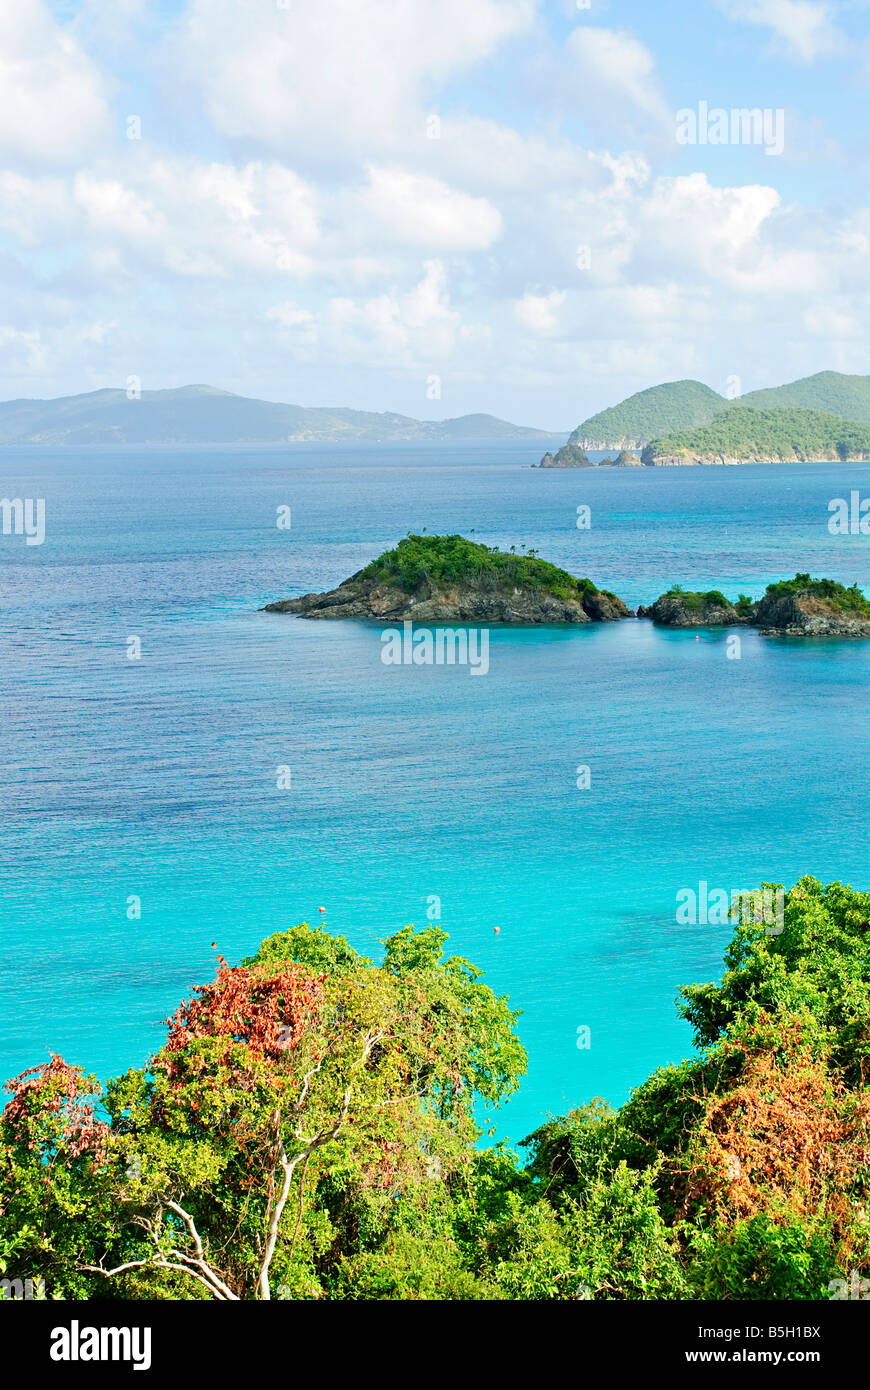 ST JOHN, US Virgin Islands - An elevated view of the waters just off Trunk Bay, St. John, US Virgin Islands, with islands of the British Virgin Islands off in the distance. Stock Photo